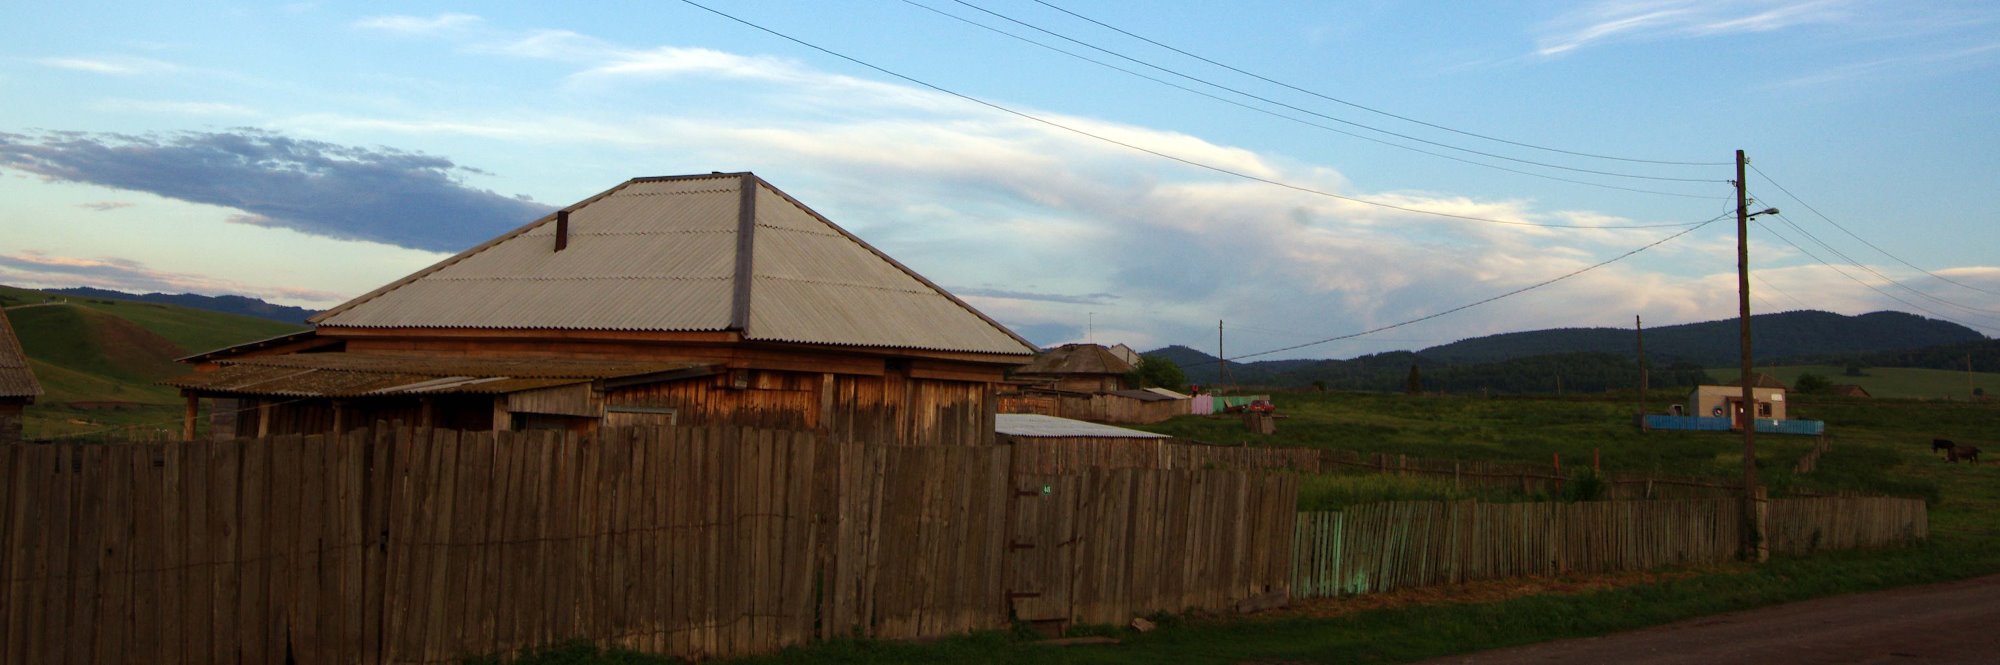 A street in the village of Chilany, Khakassia